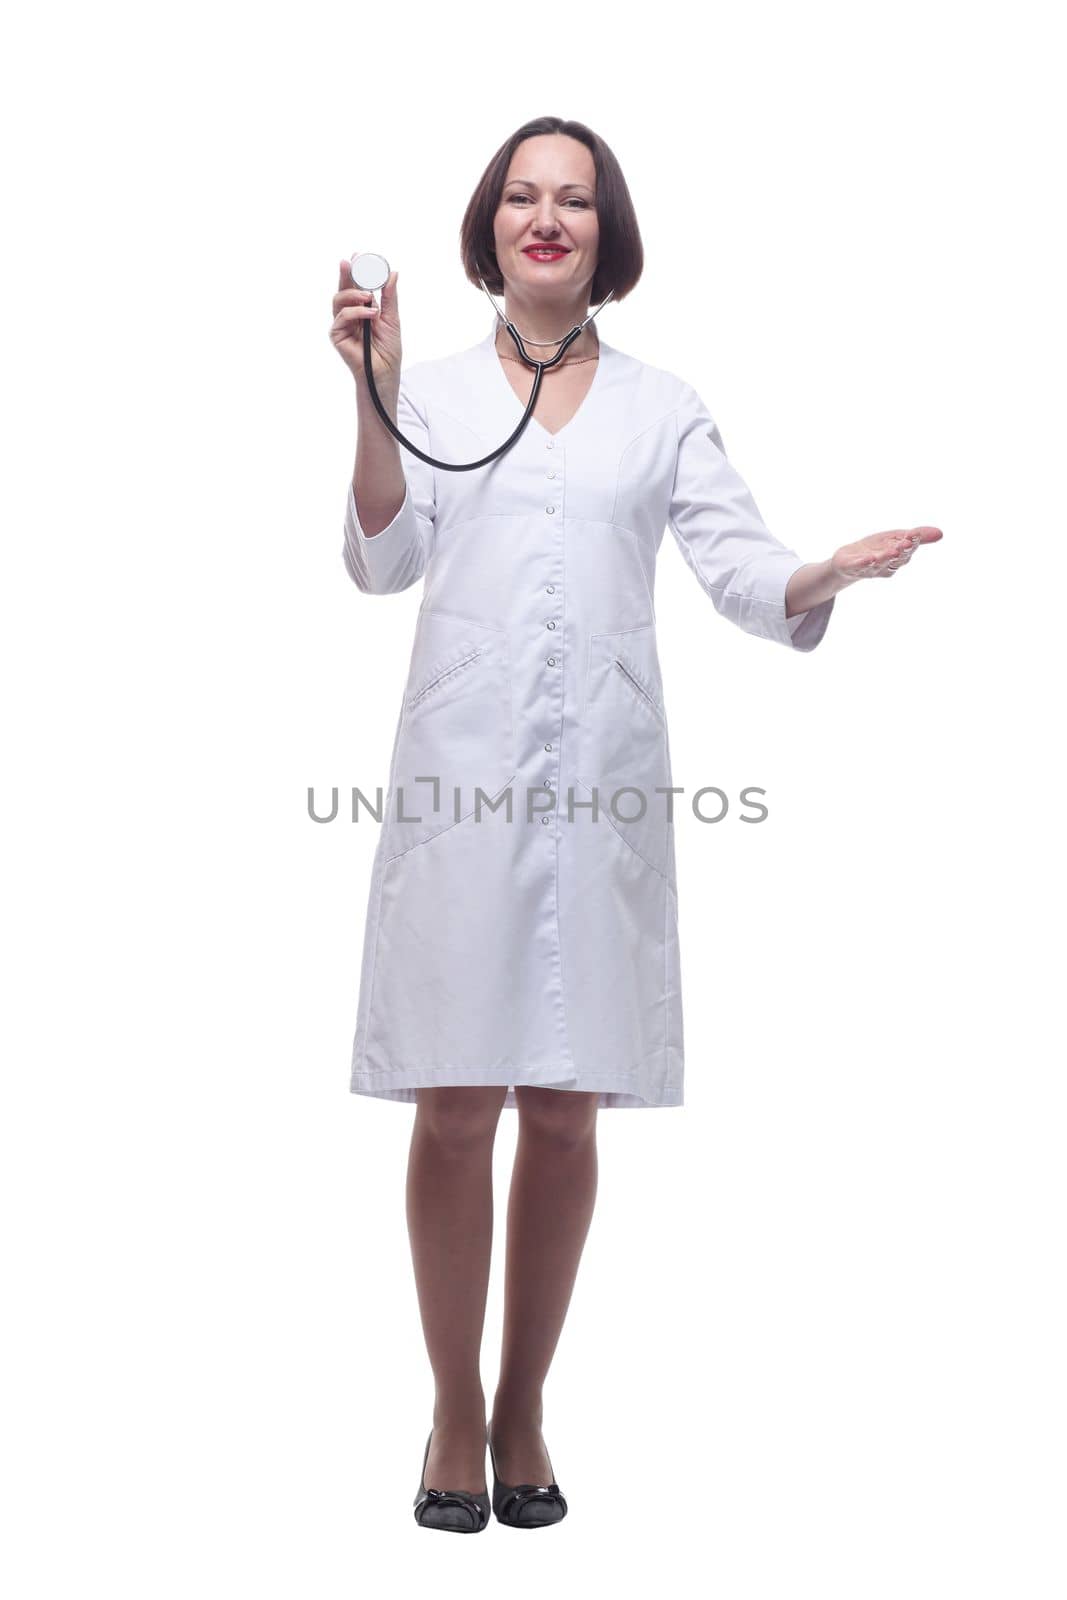 confident female doctor holds her stethoscope . isolated on a white background. by asdf